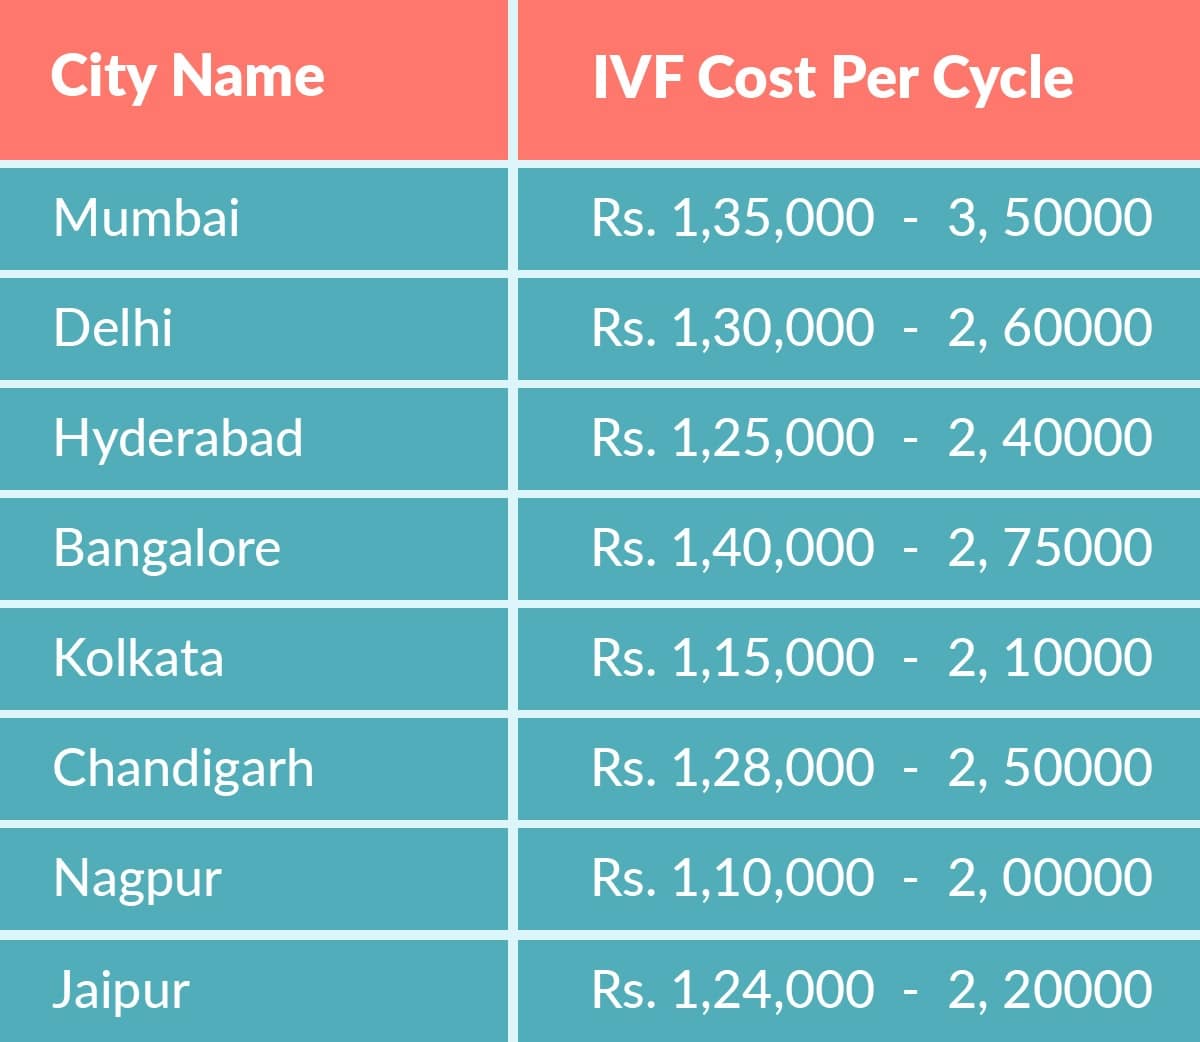 ivf cost in india - What is the IVF Cost in India 2020?